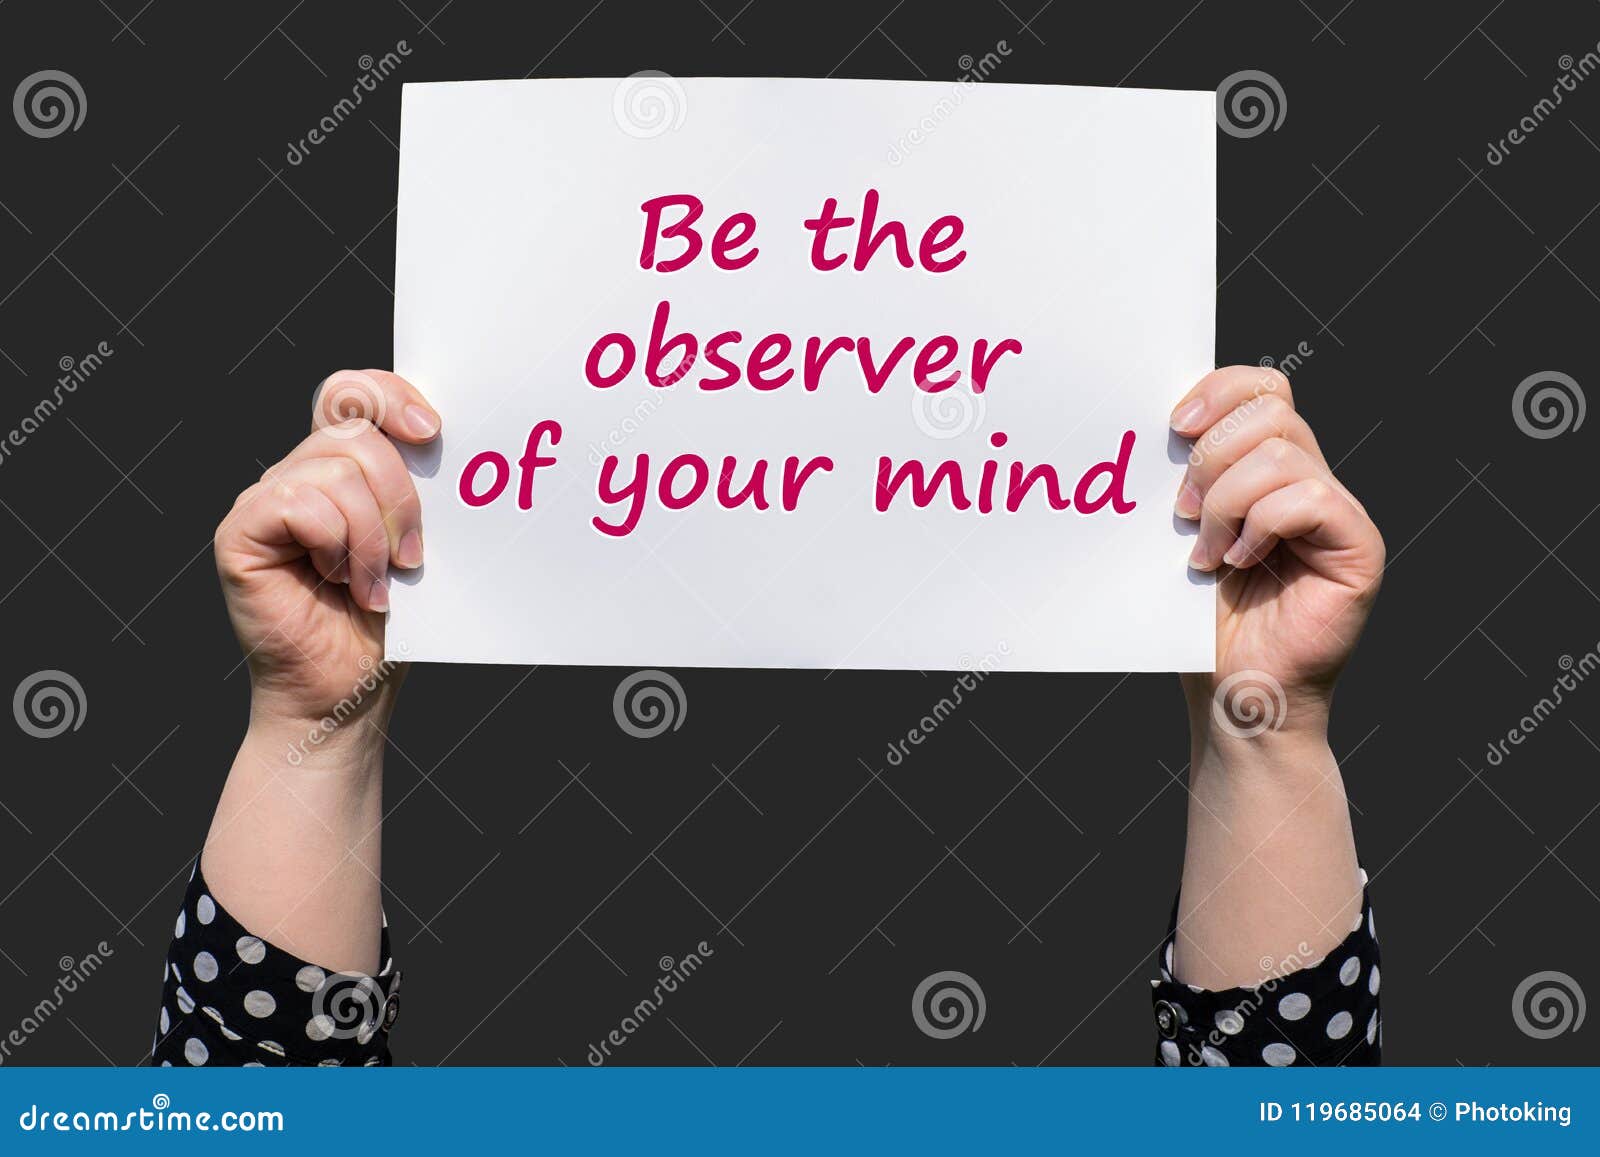 be the observer of your mind